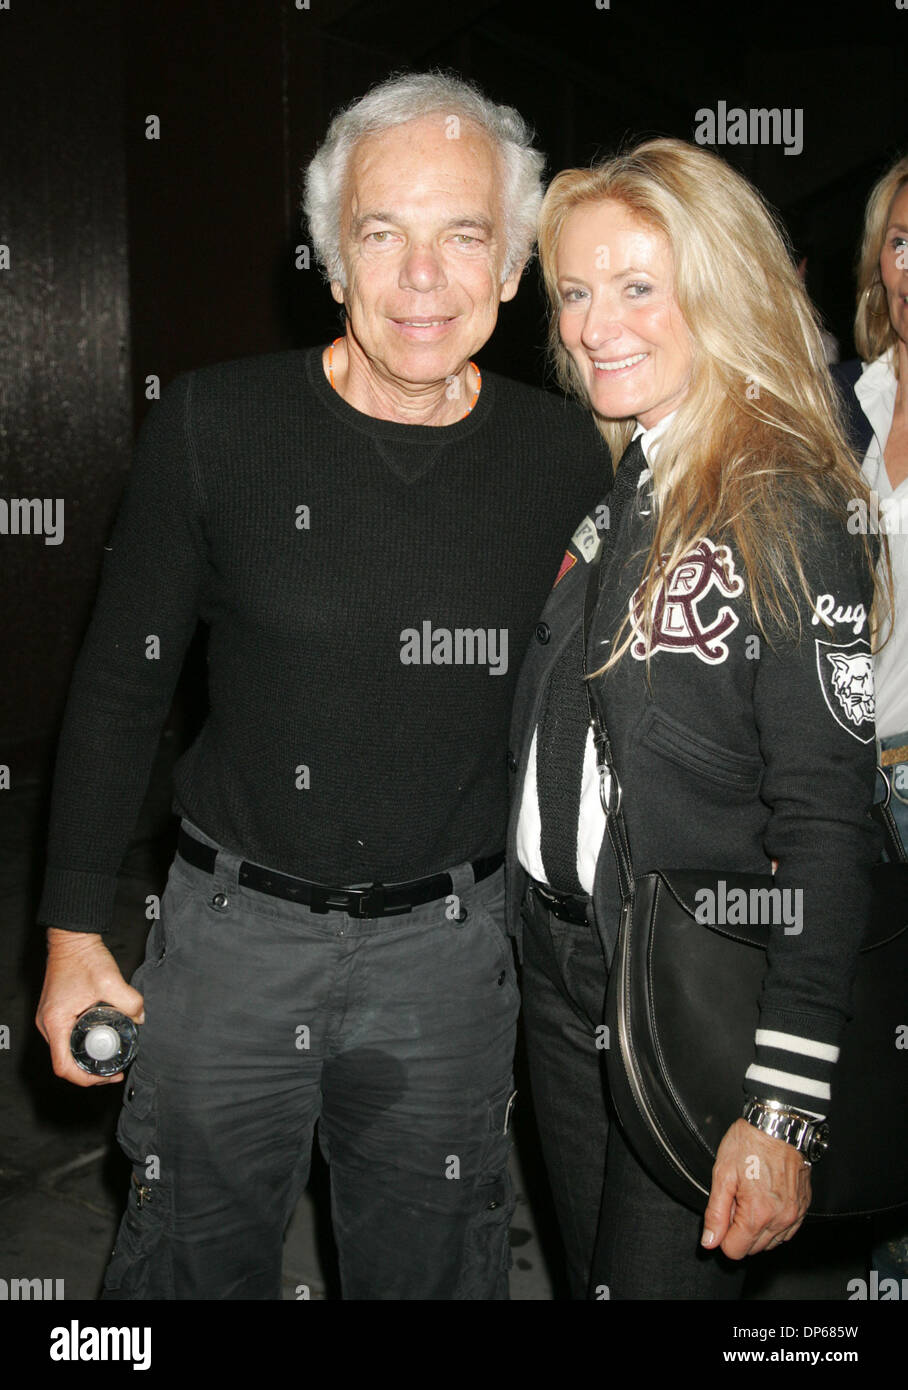 Ralph Lauren and wife Ricky touch down in New York City